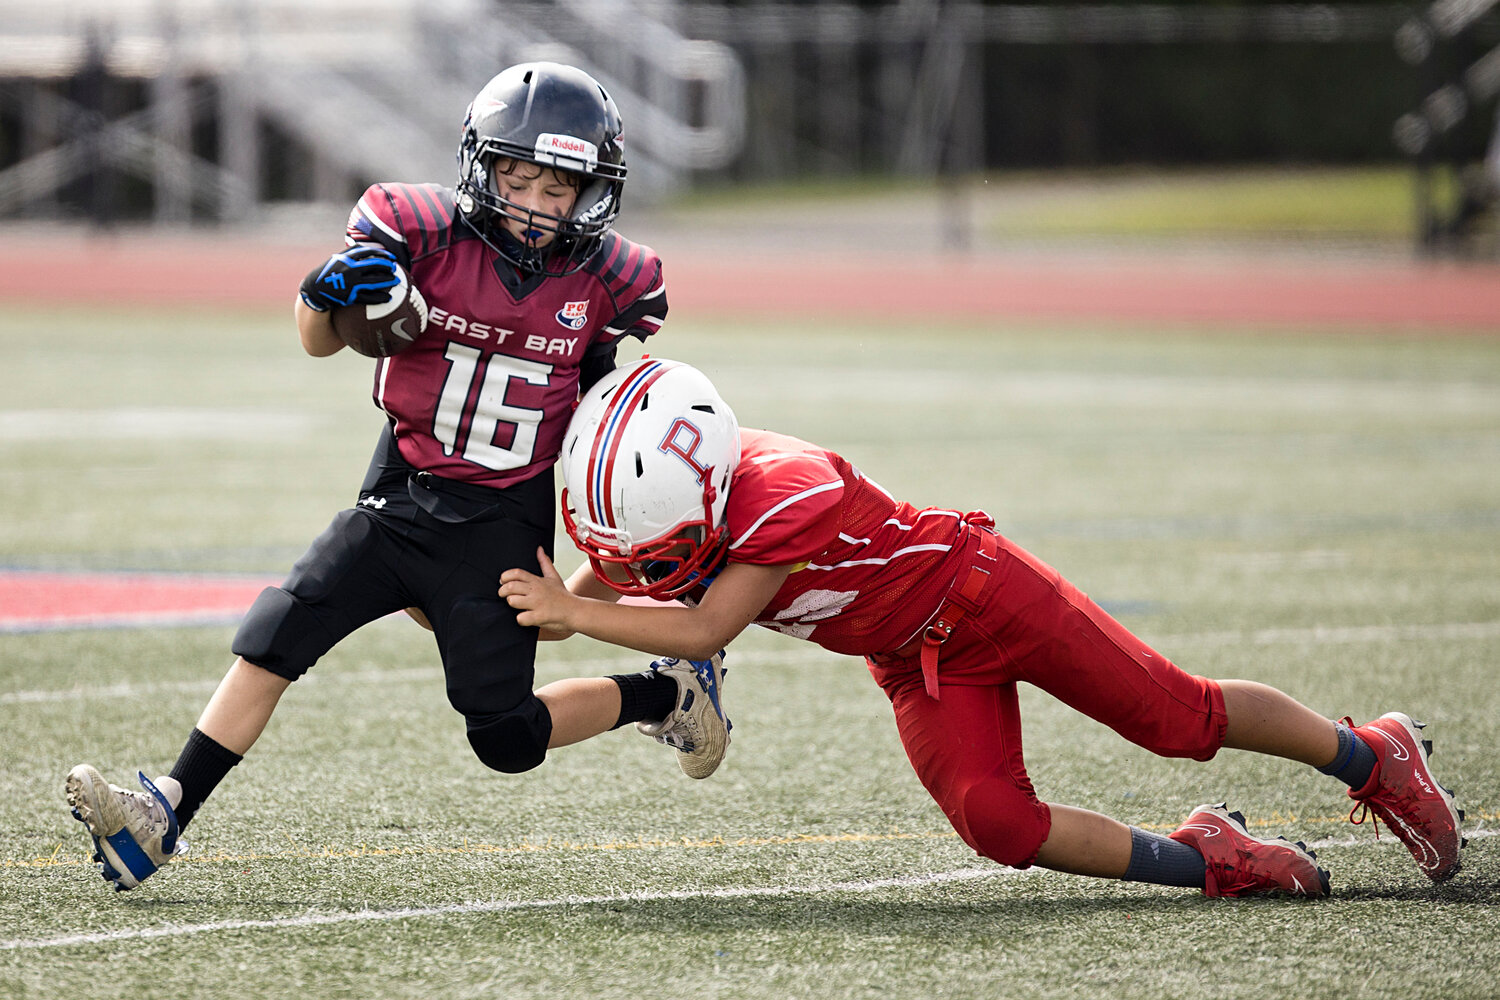 8U player, Levi Coelho breaks a tackle running the ball against Portsmouth. 